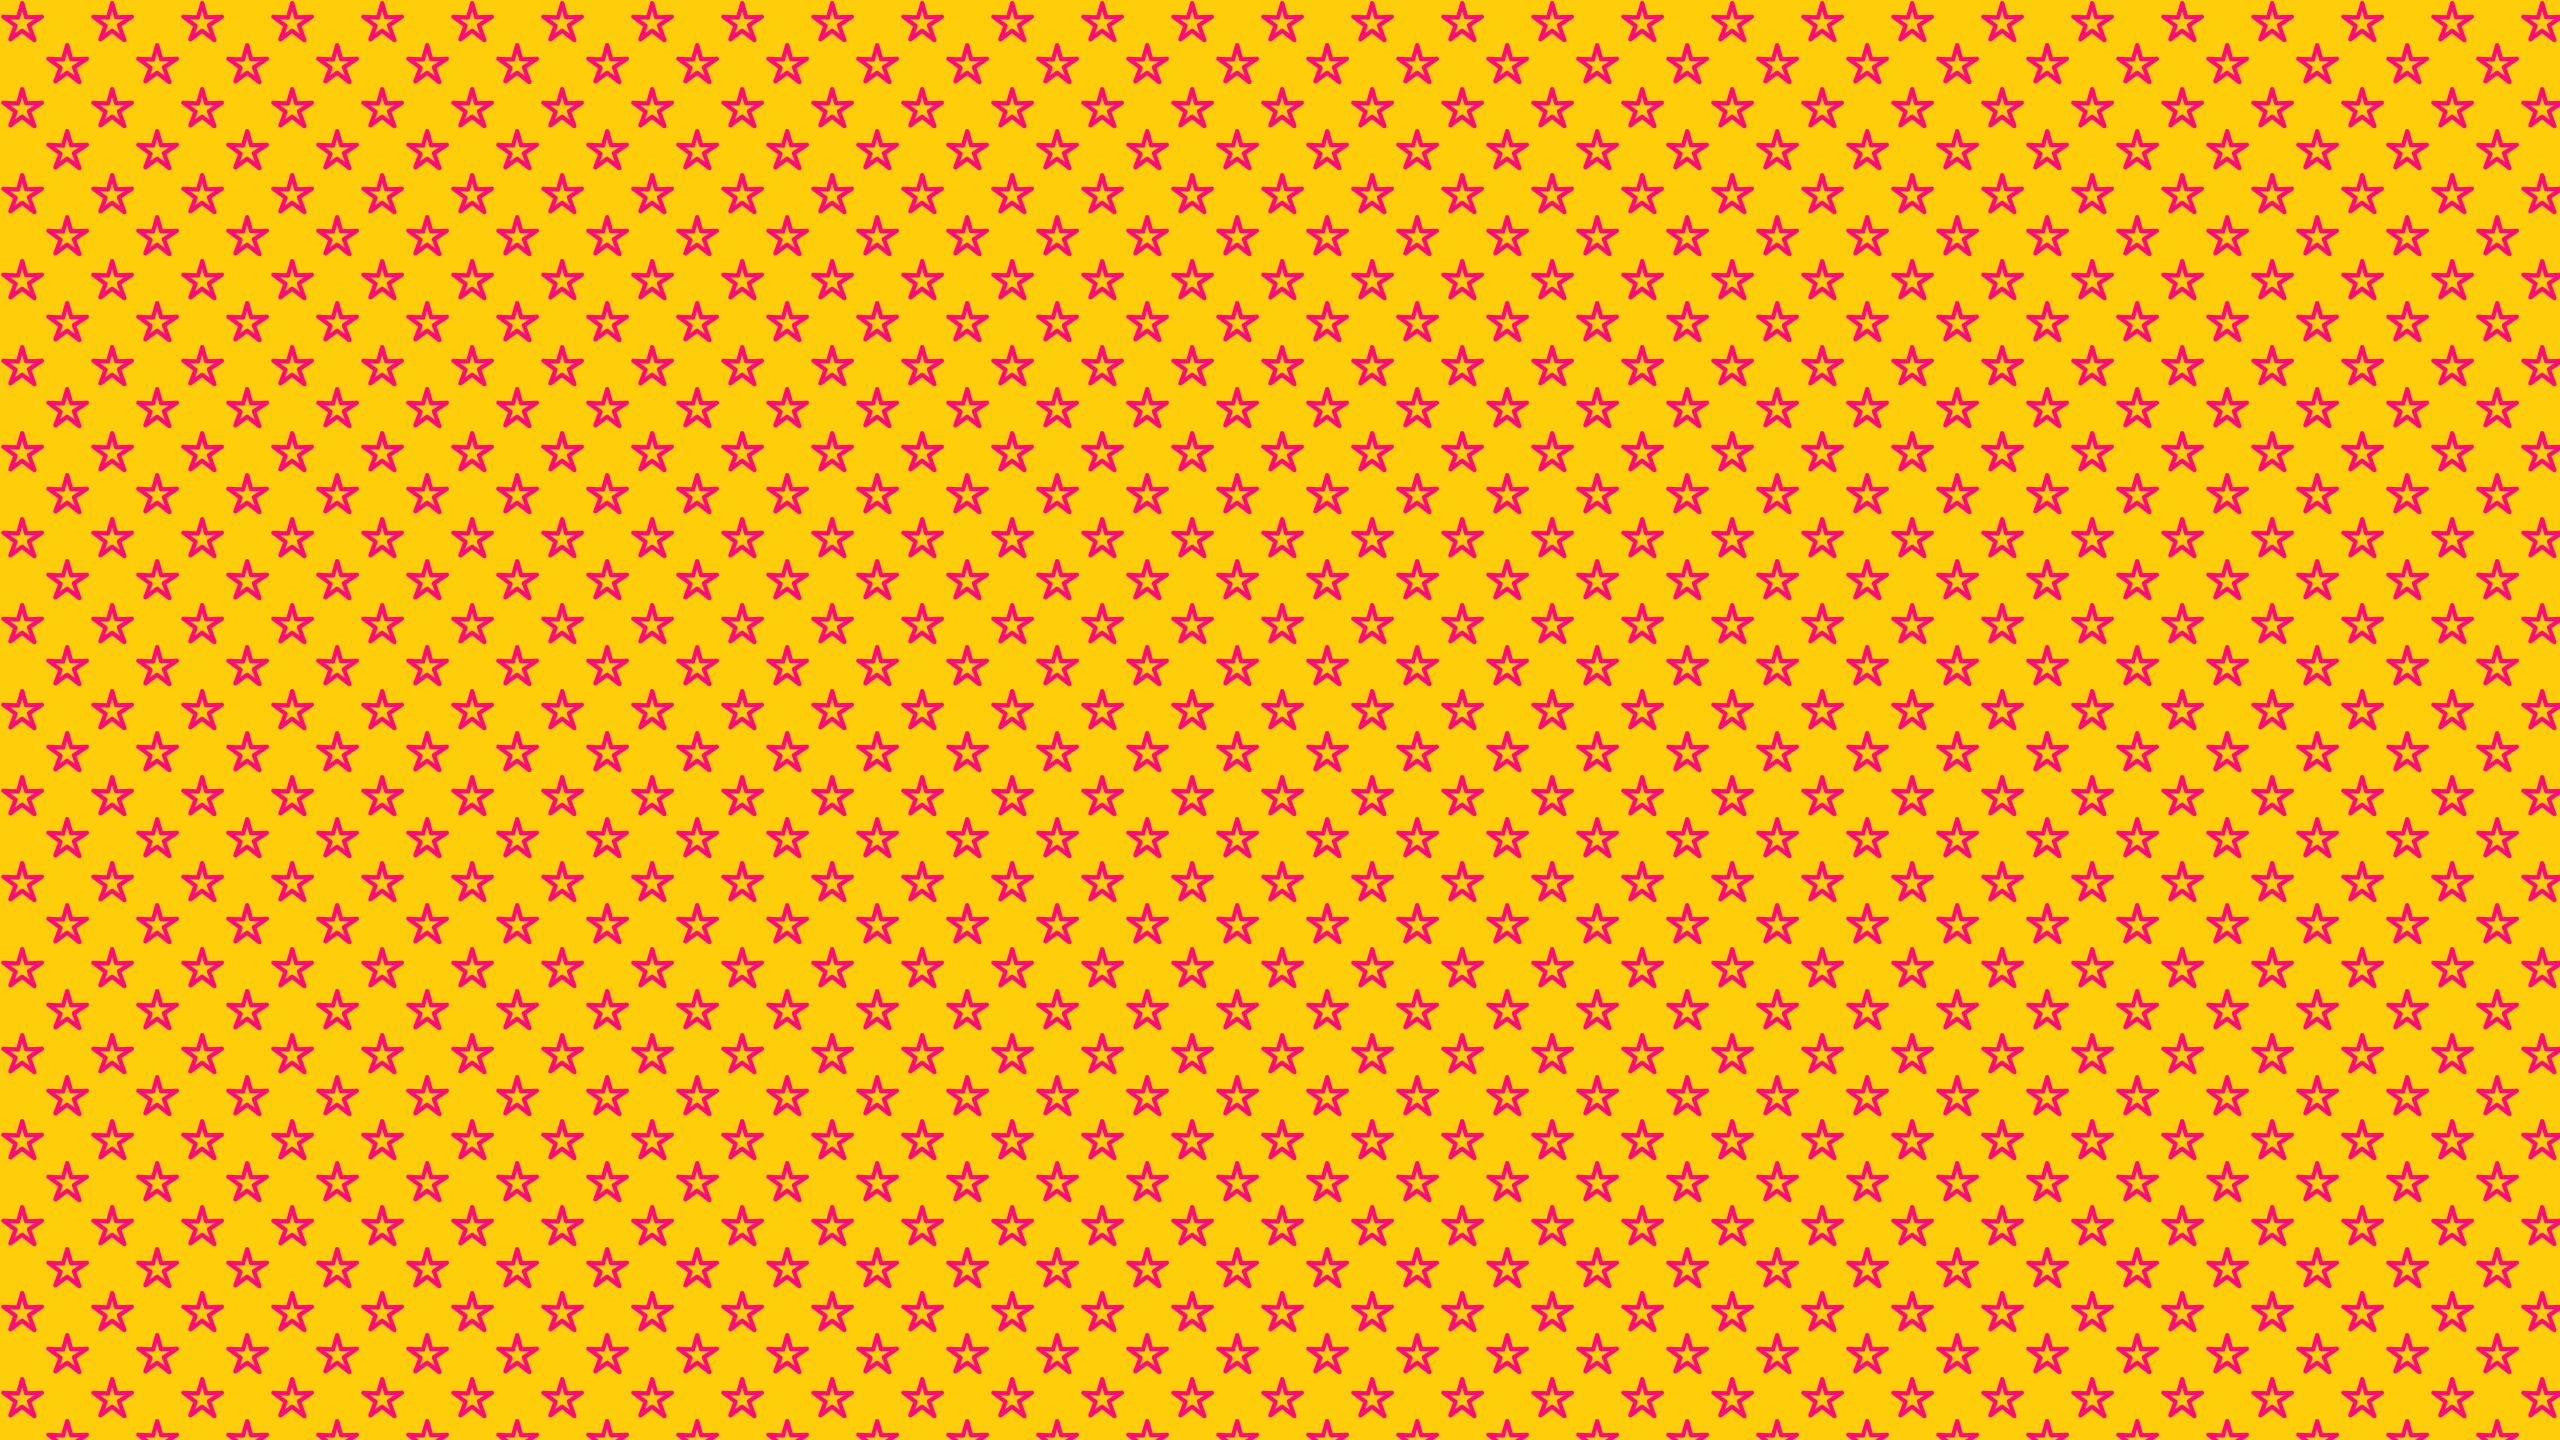 Aesthetic Wallpapers Yellow Stars Png Images 4 Wallpaper - textura wallpaper brawl stars 2560x1440